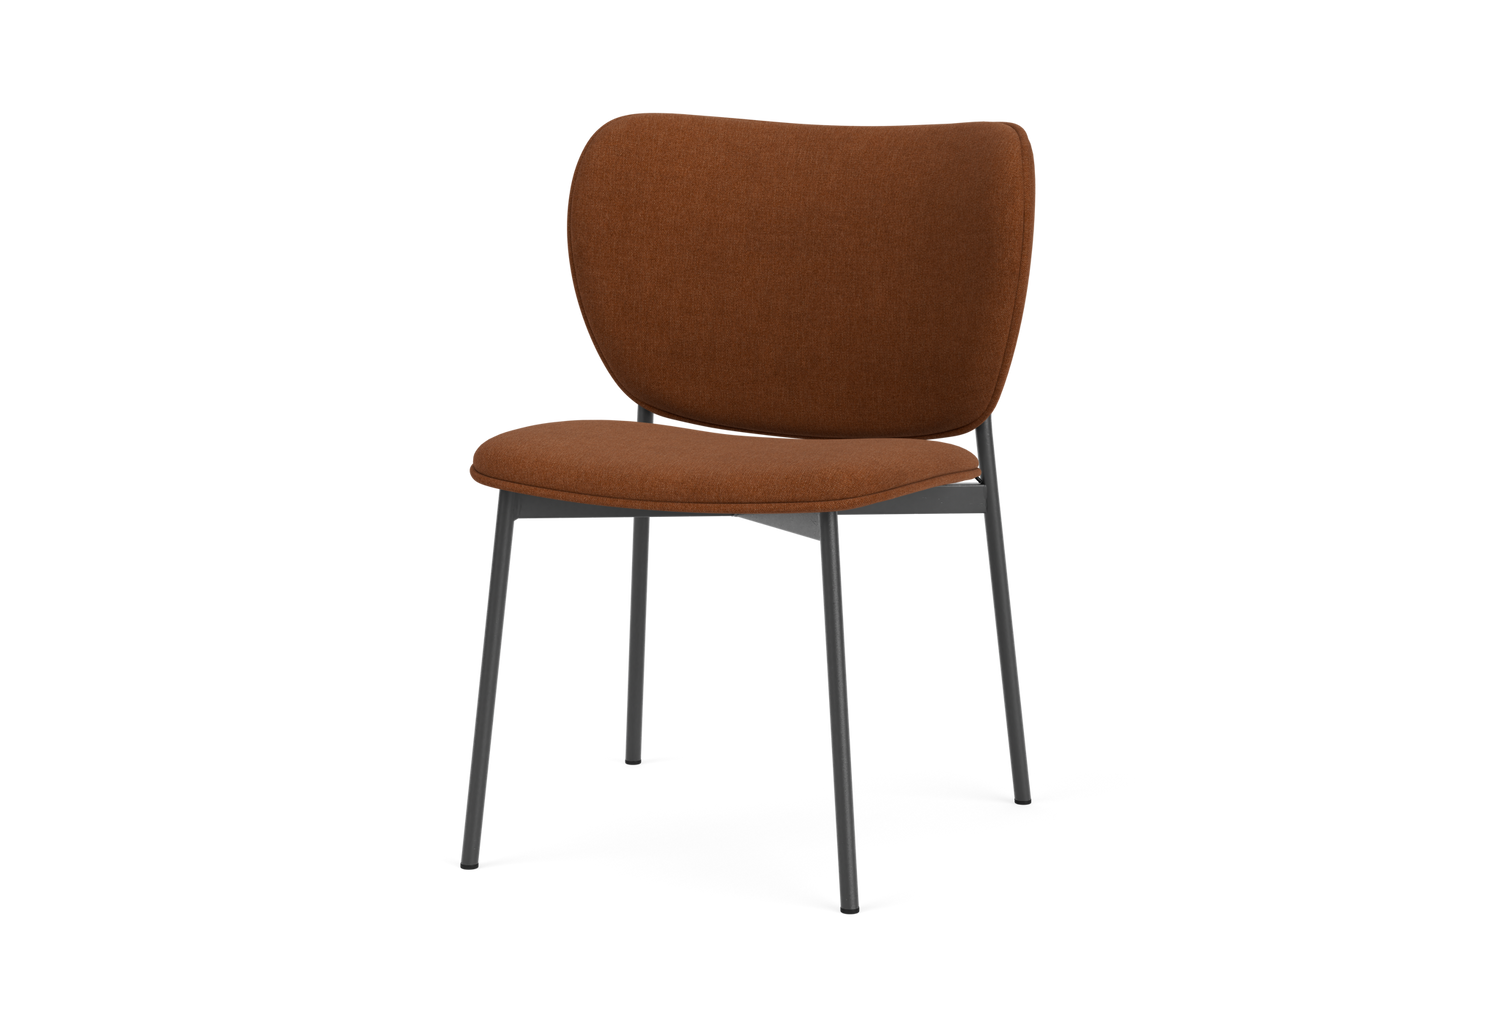 Dining chairs in stock-1